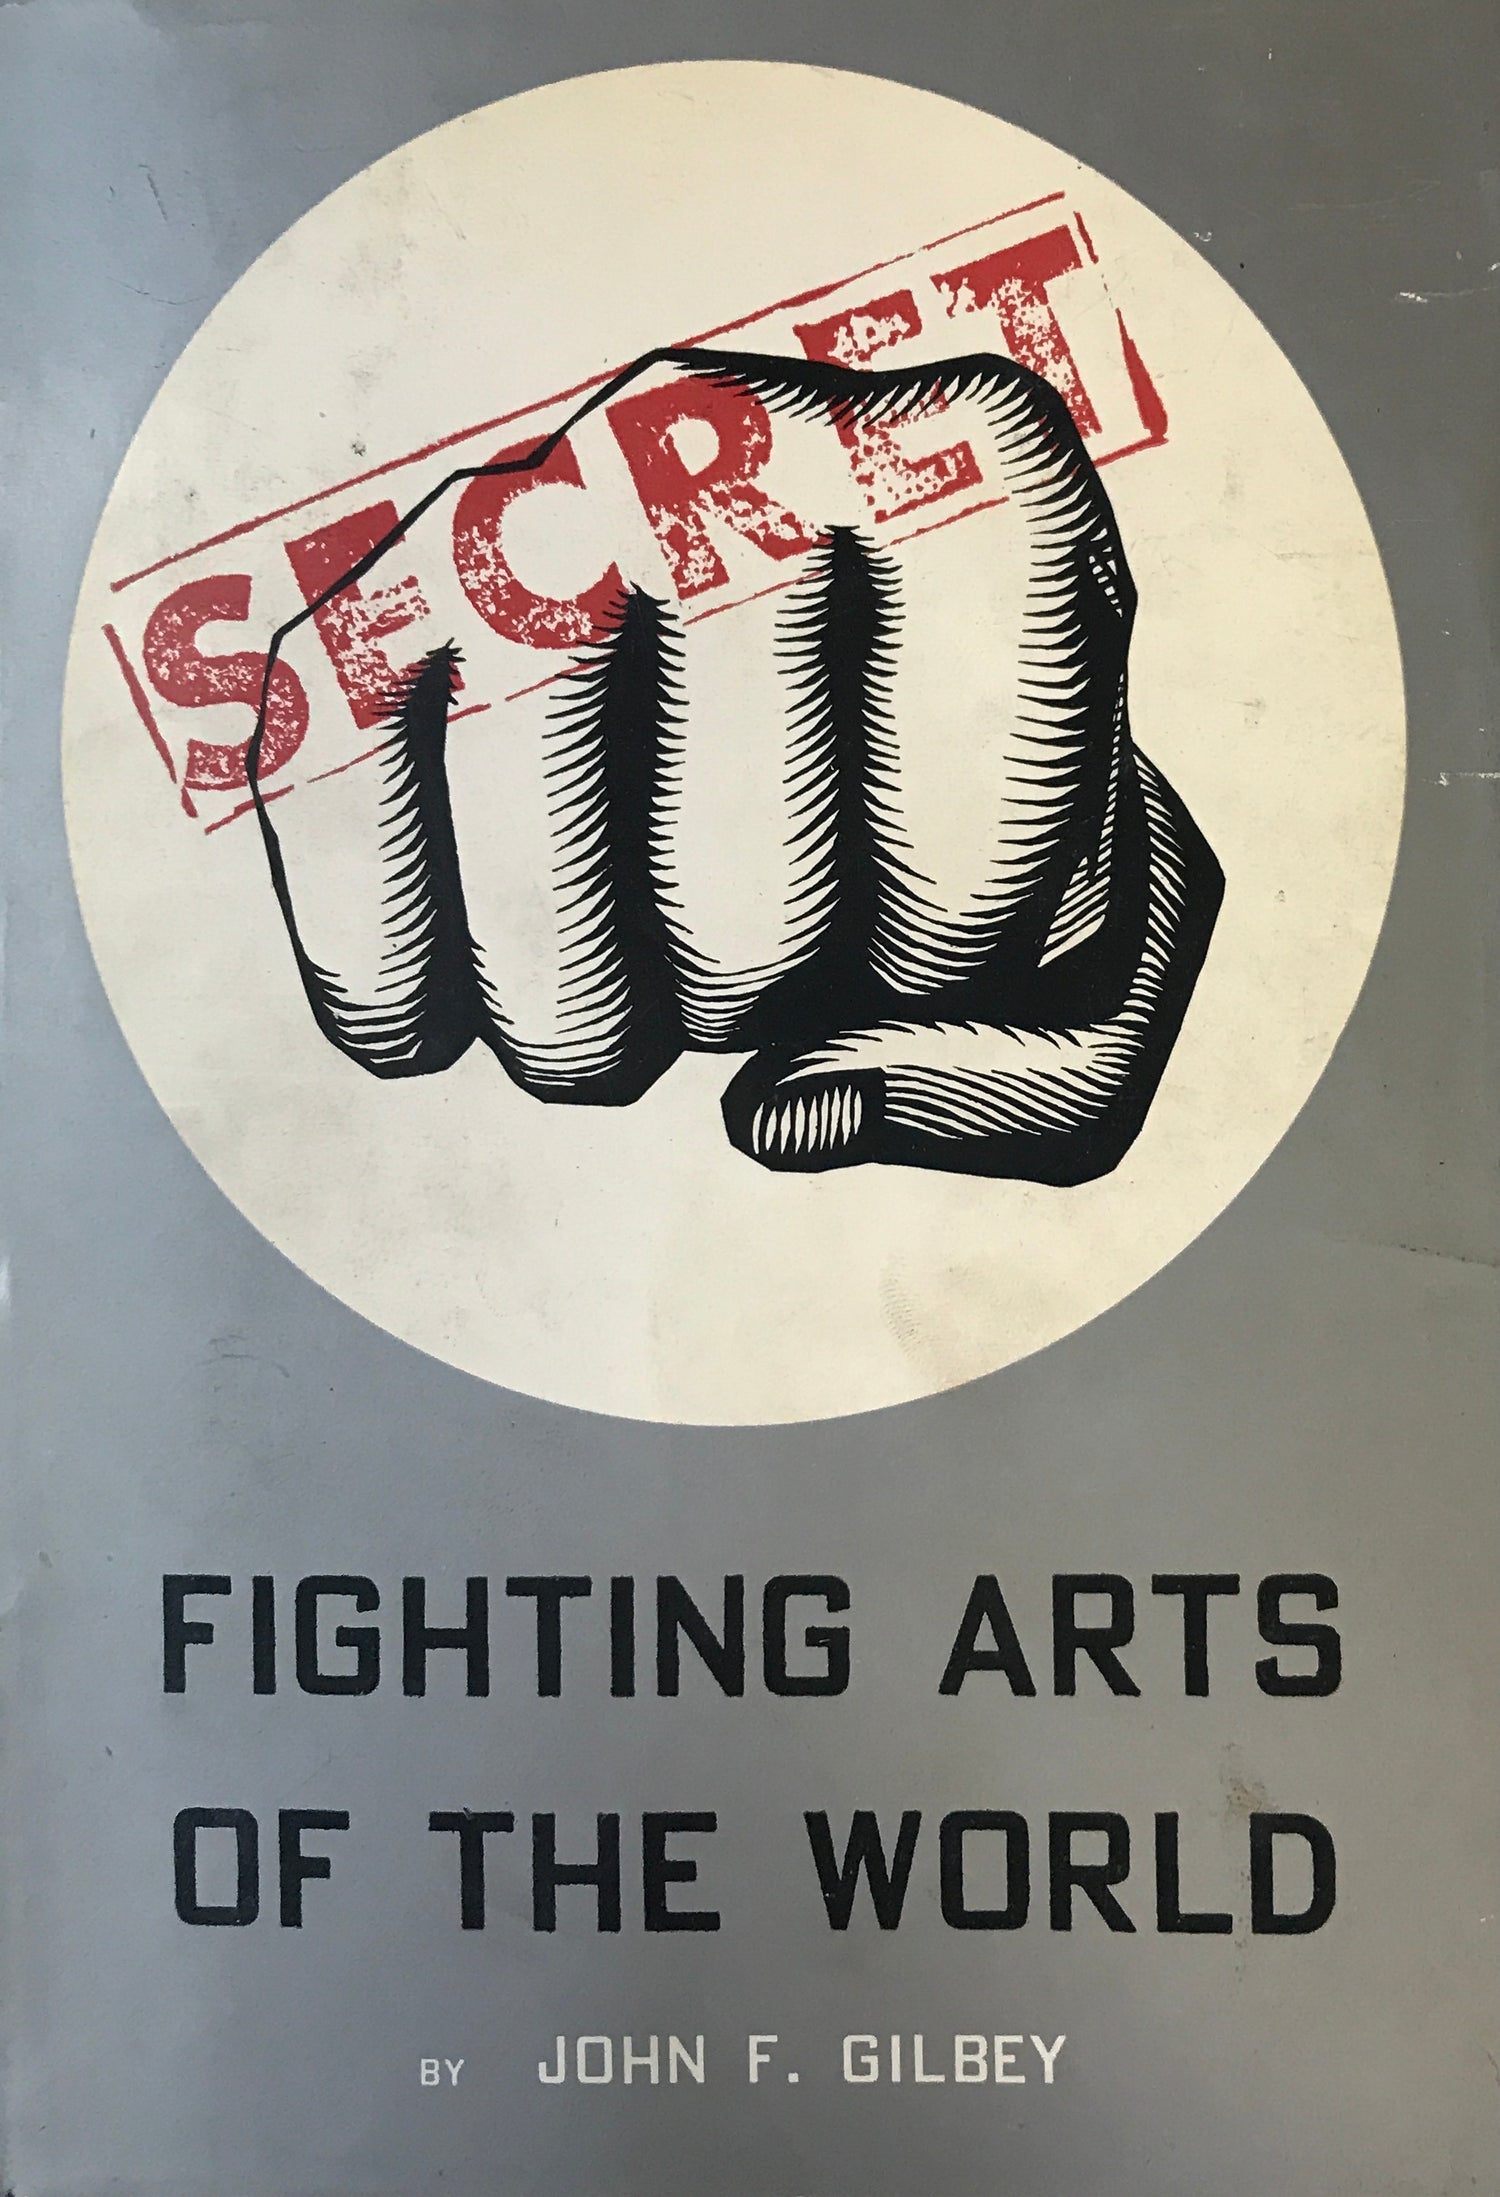 Secret Fighting Arts of the World Book by John Gilbey (Hardcover) (Preowned) - Budovideos Inc